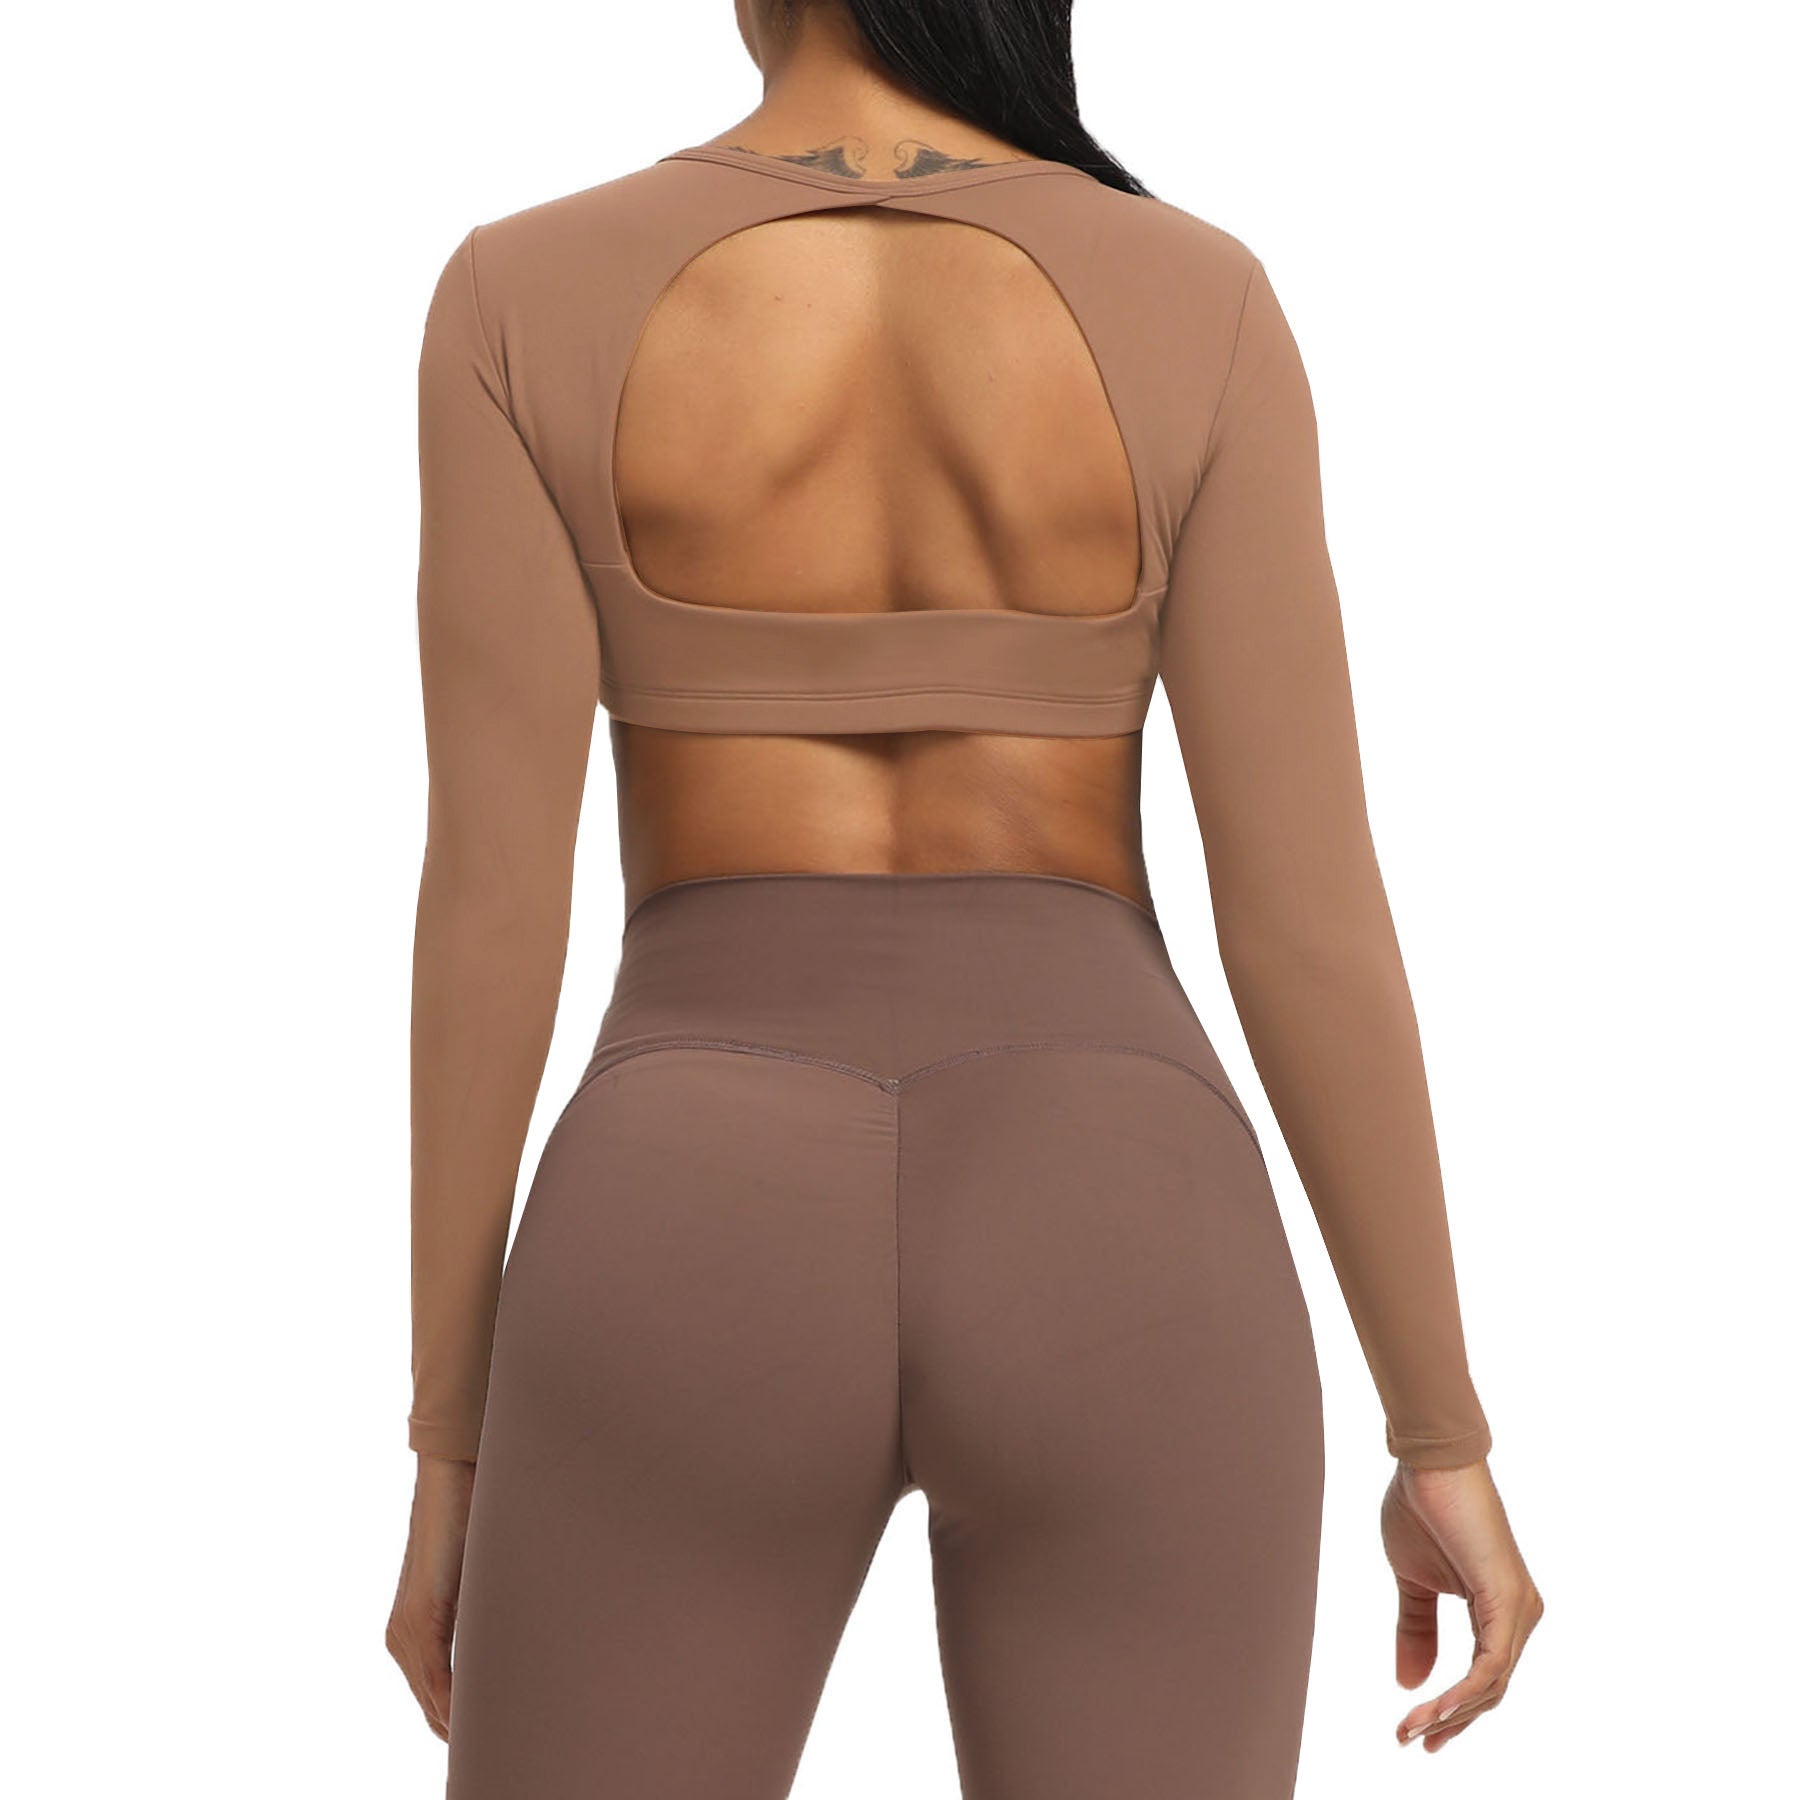 Aoxjox "Hollow Back" Long Sleeve Crop (CONT'D)